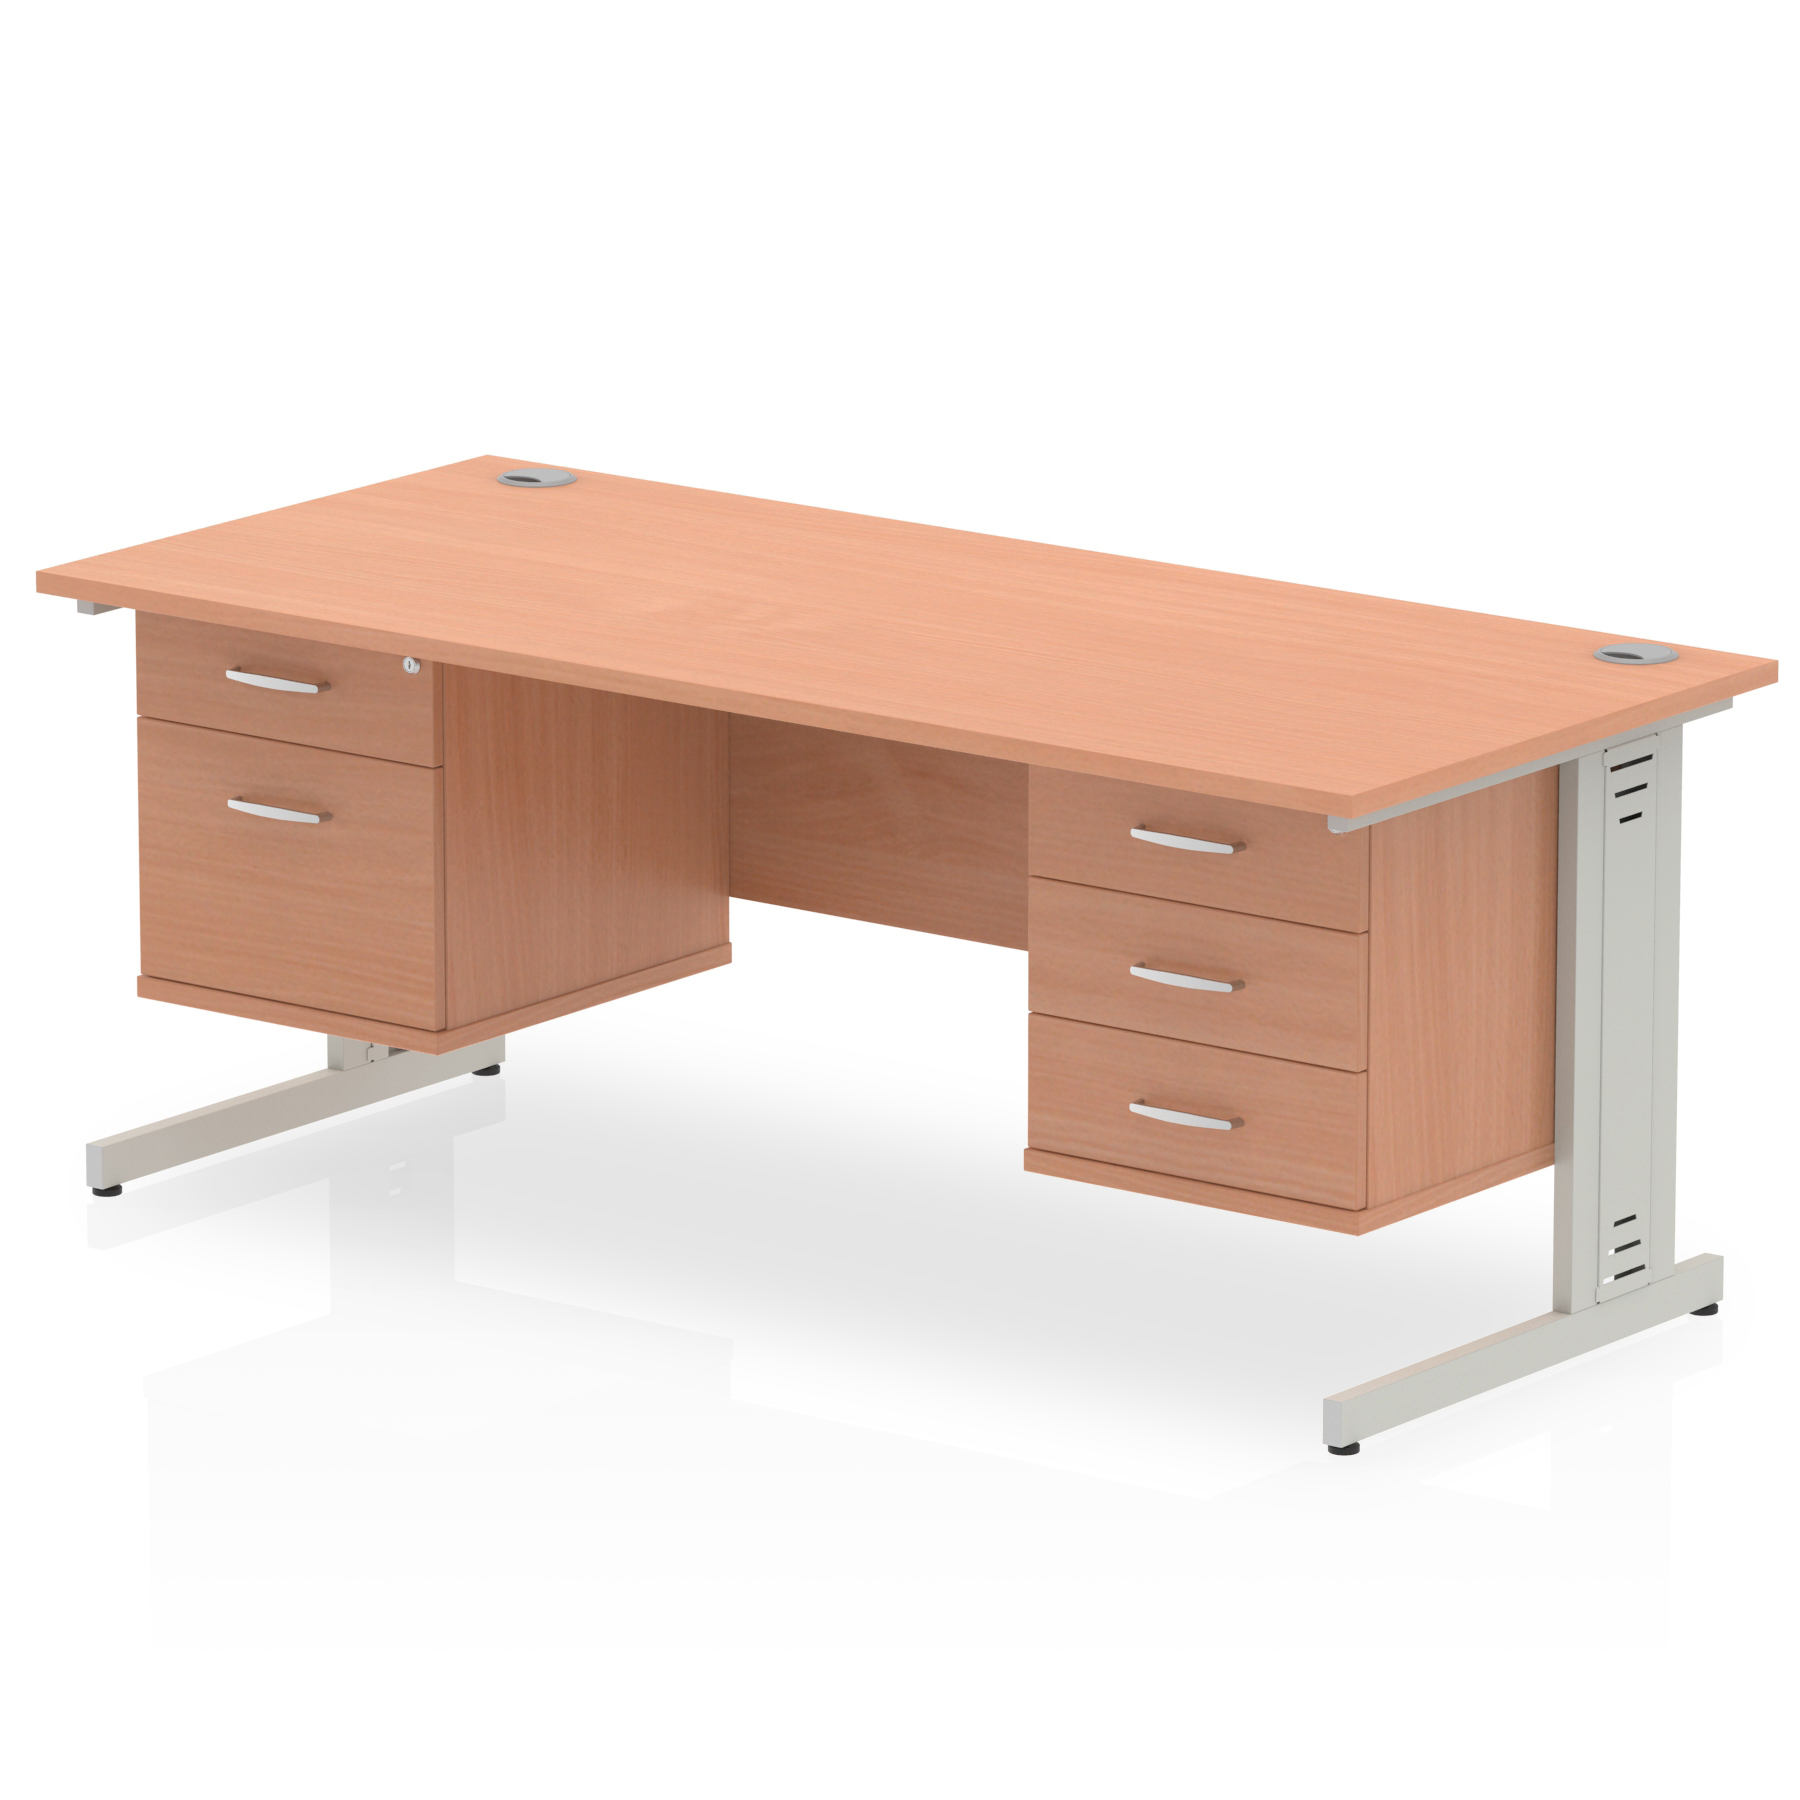 Impulse 1600 x 800mm Straight Desk Beech Top Silver Cable Managed Leg 1 x 2 Drawer 1 x 3 Drawer Fixed Pedestal